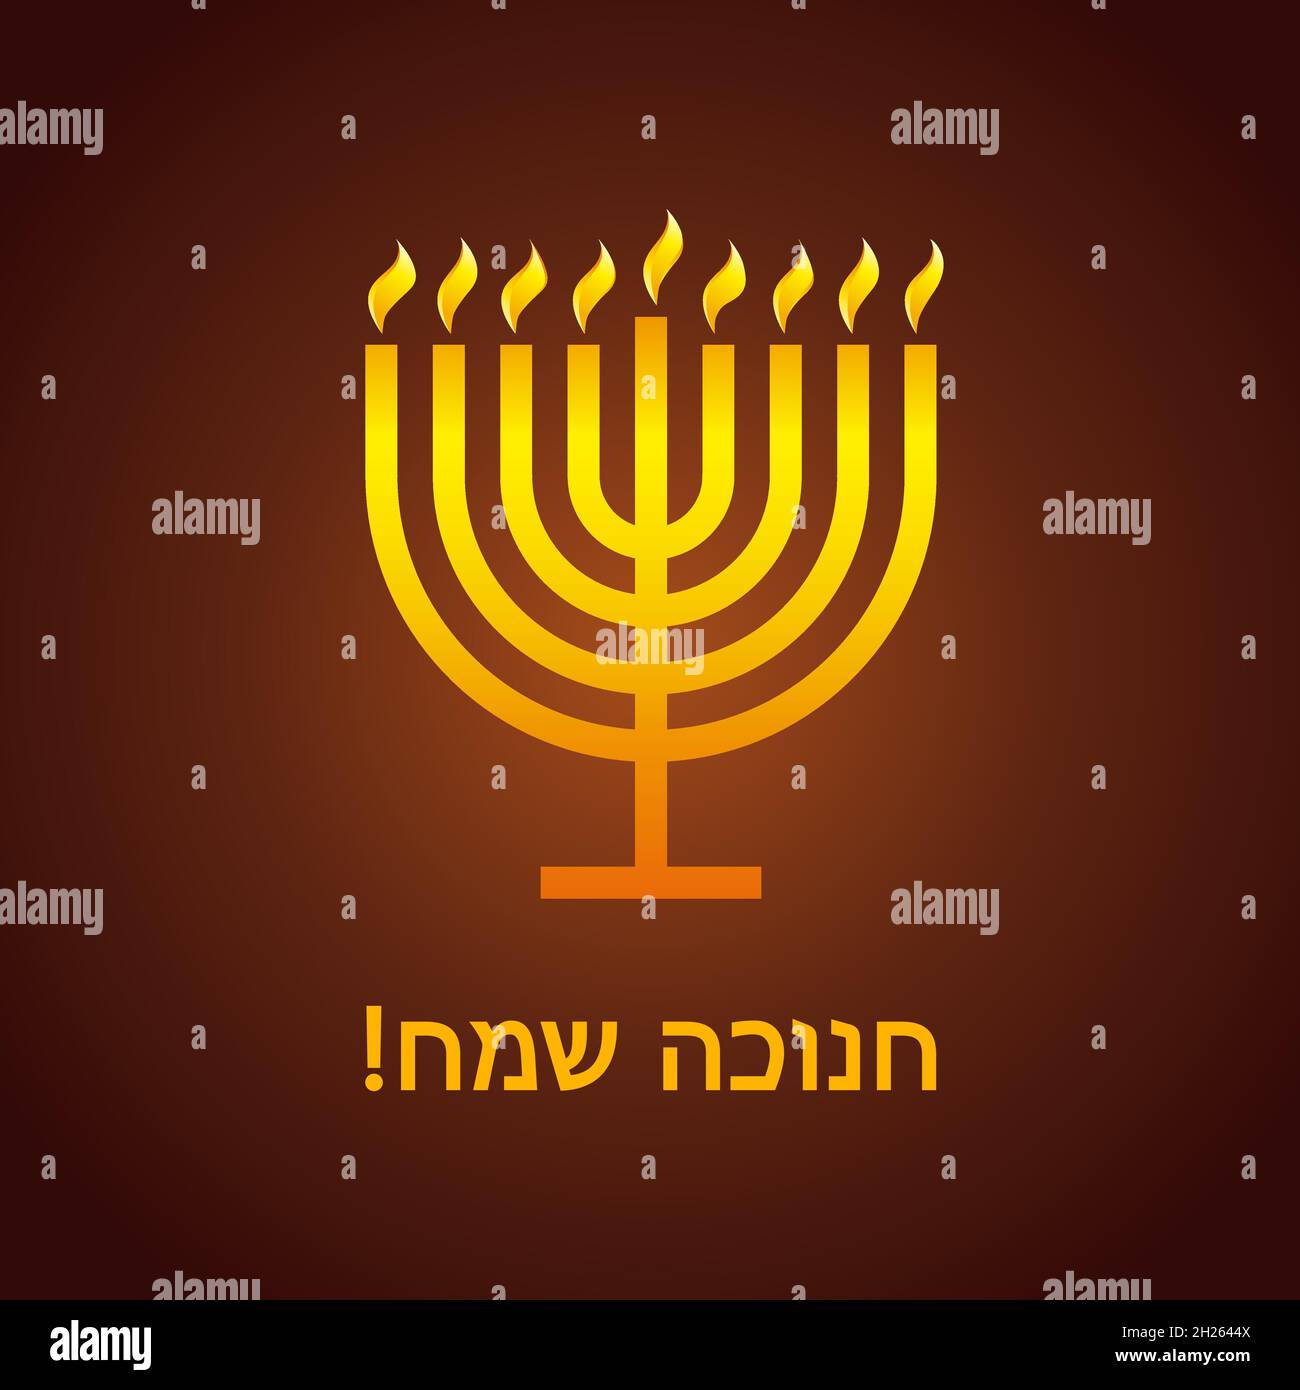 Happy Hanukkah sameah congrats. Isolated abstract graphic design ...